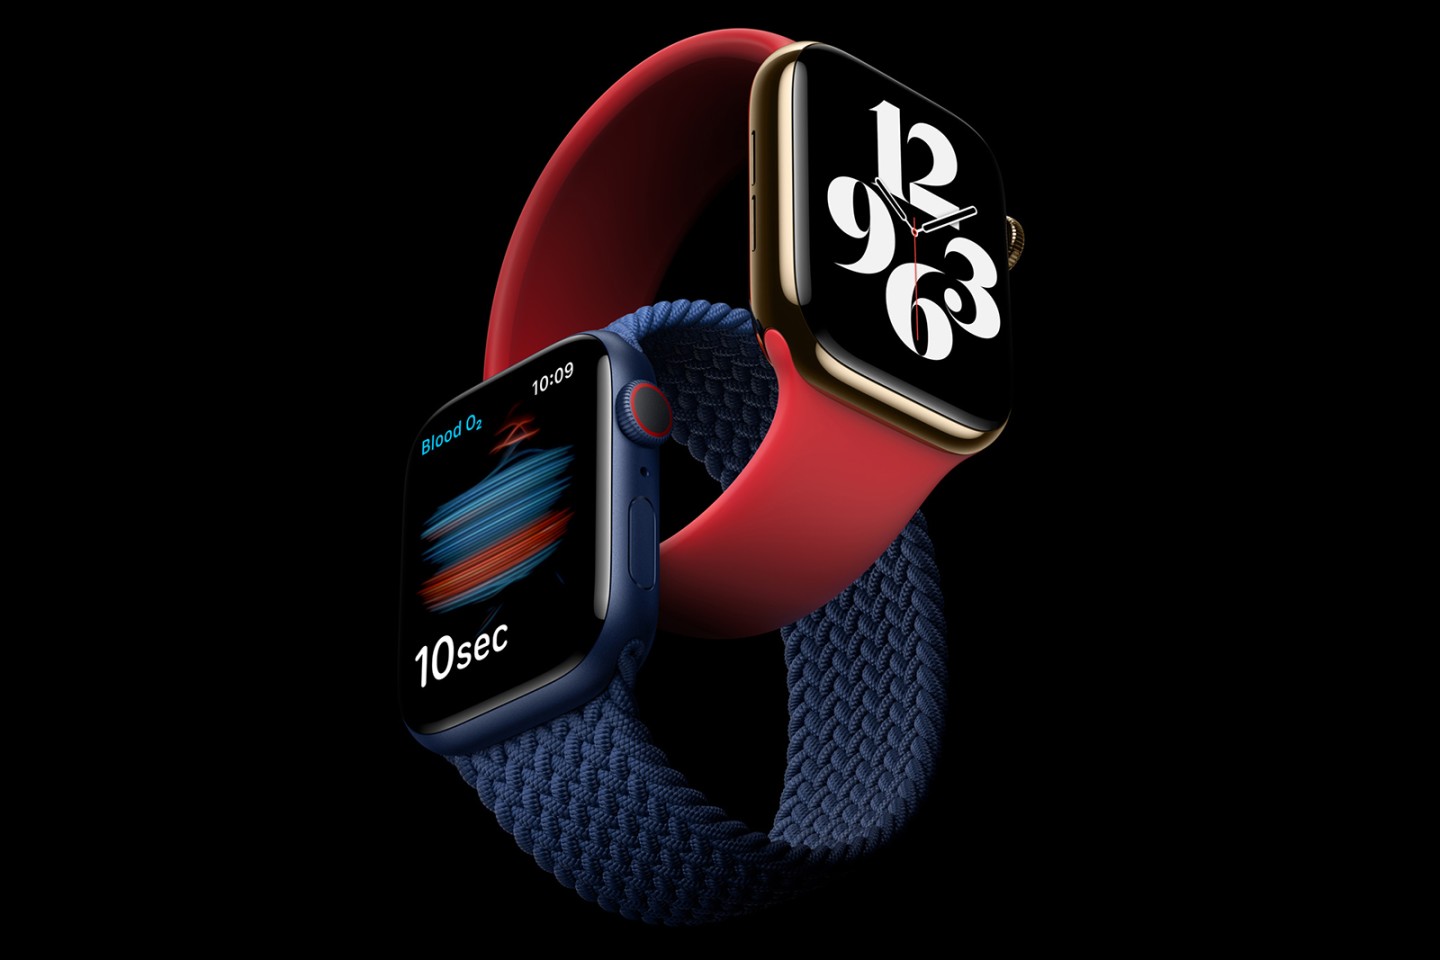 The newest Apple Watch adds extra sensors and new watch faces